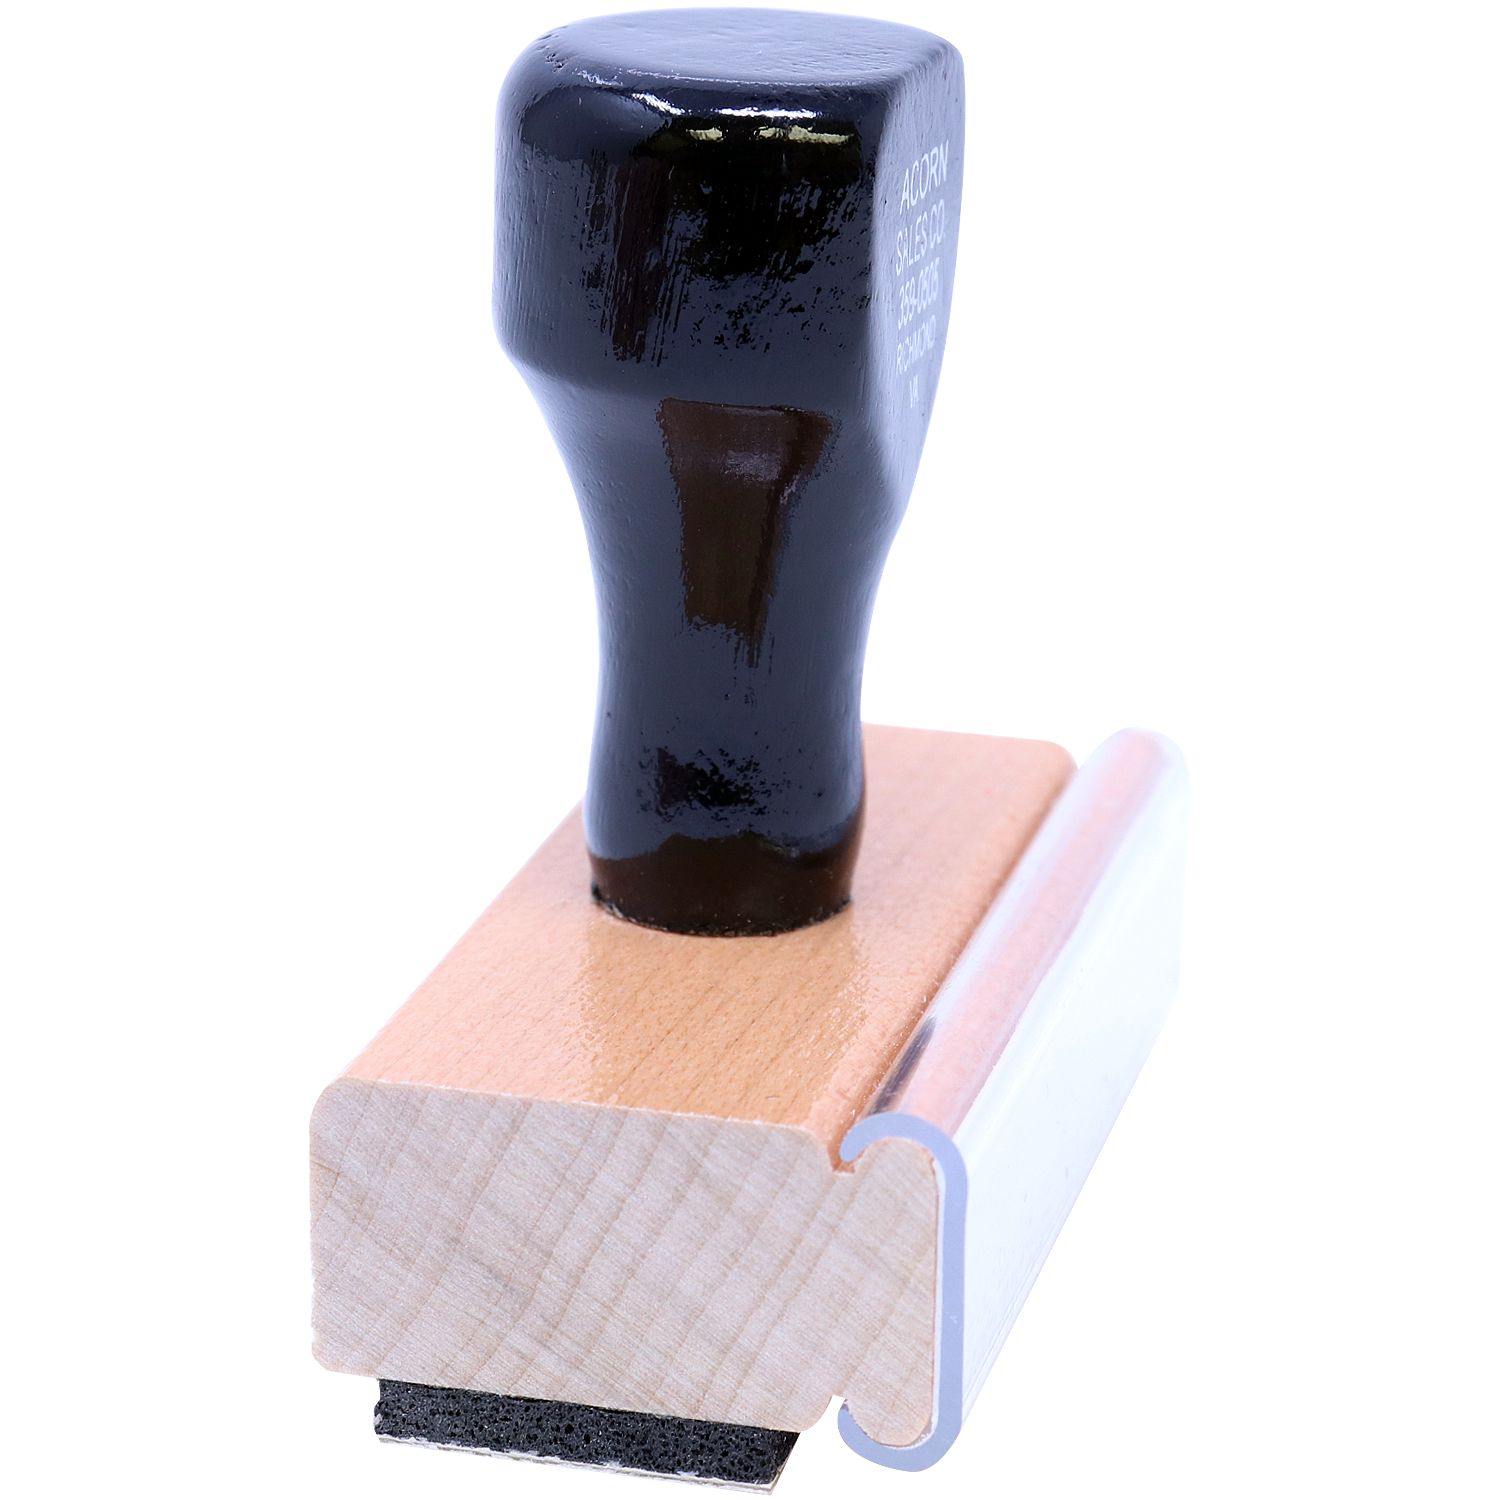 Side View of Large Insufficient Address Rubber Stamp at an Angle